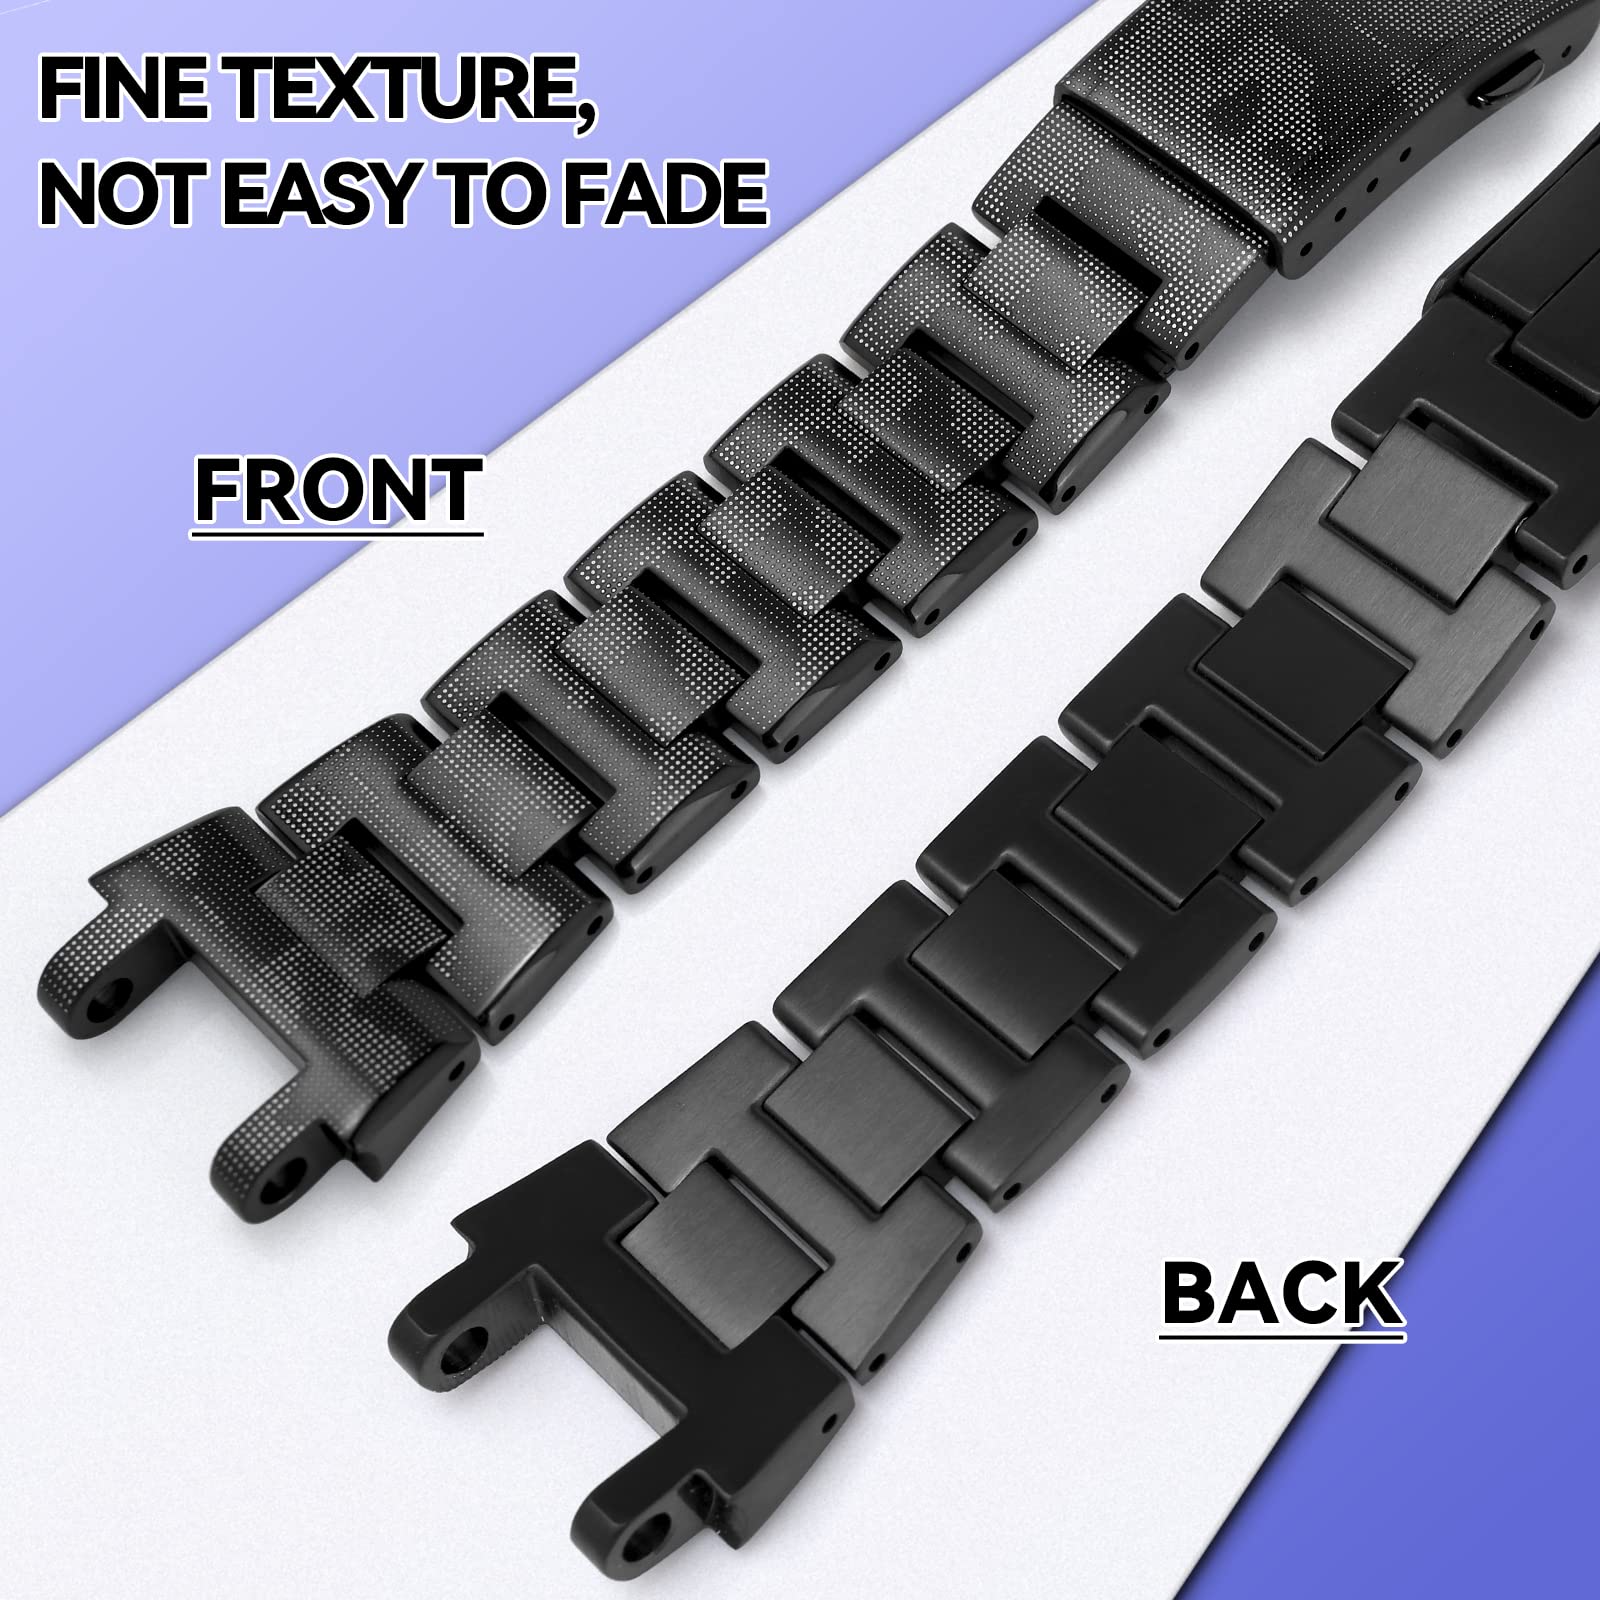 Replacement Metal Watch Band Bracelet For Casio G-Shock MTG-B1000 MTGB1000 316 Stainless Steel Strap Watch Modified Accessories